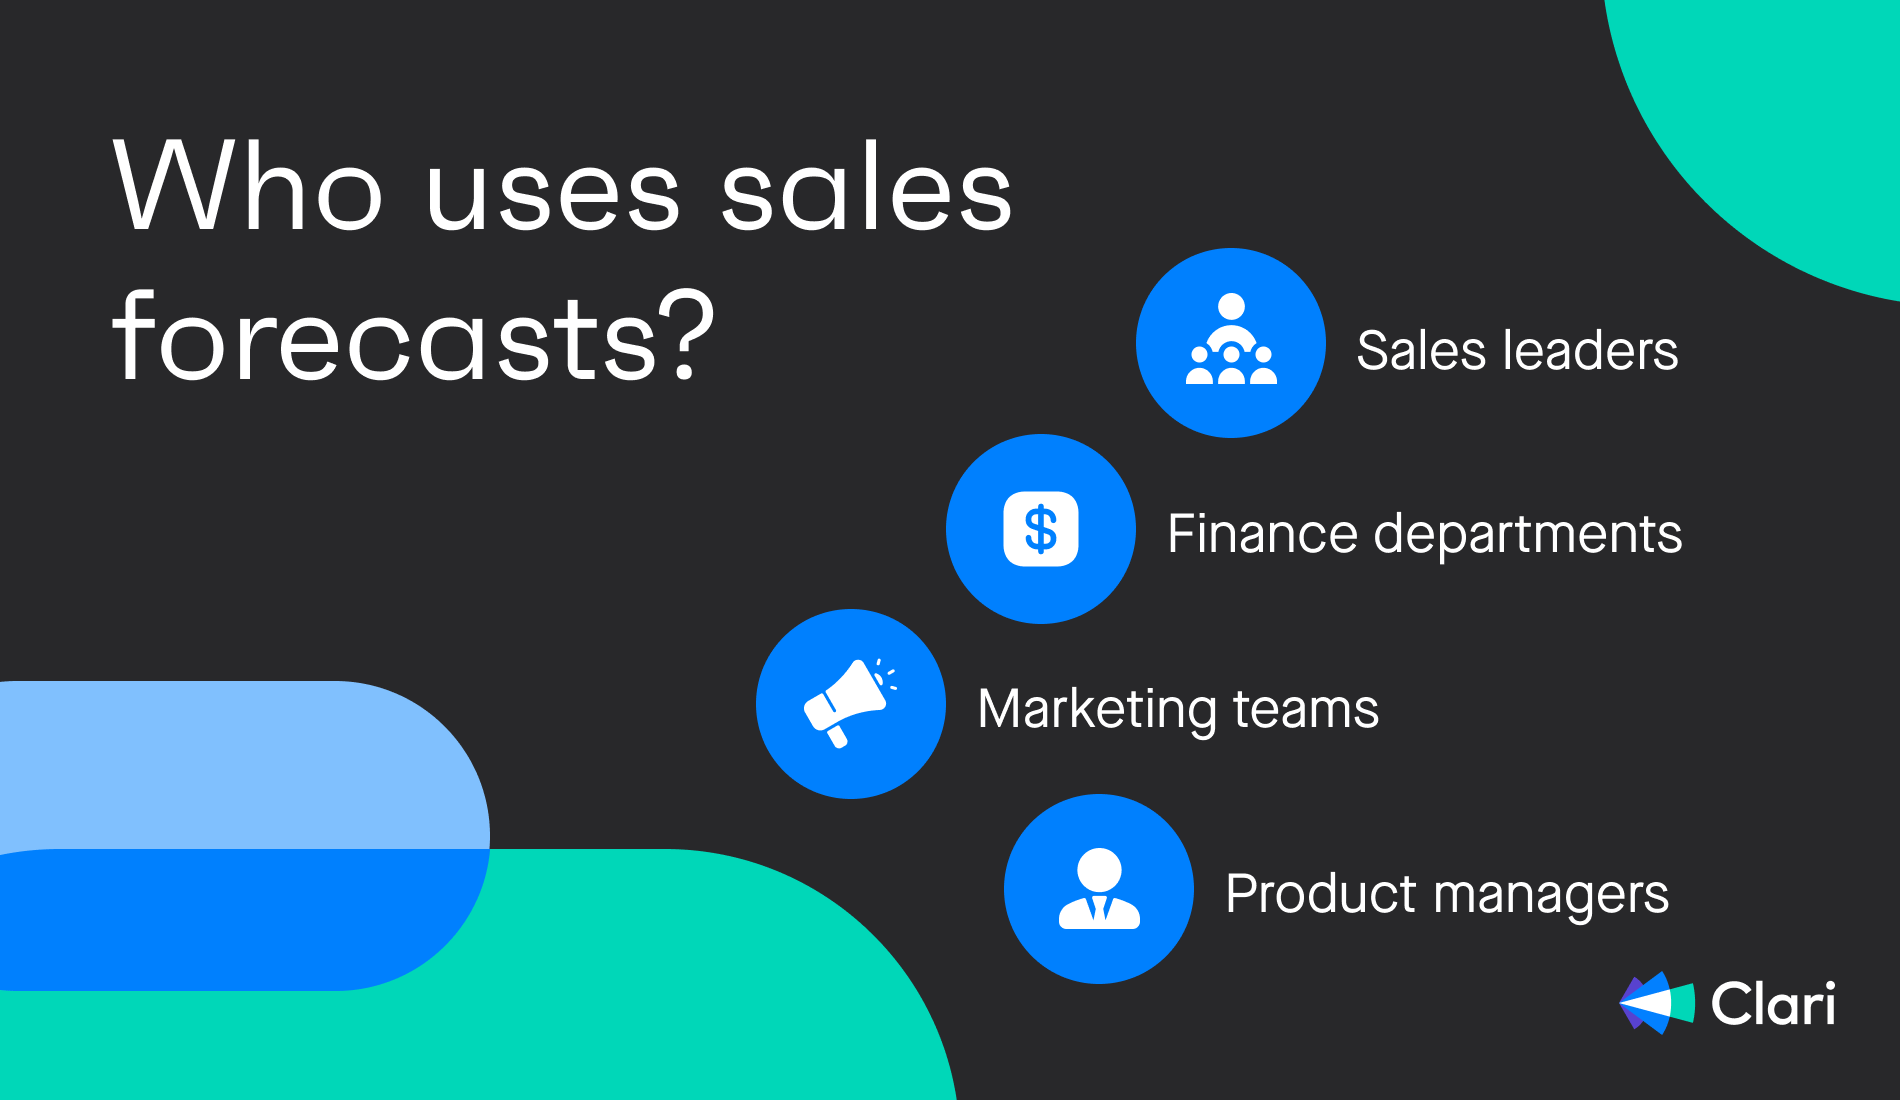 Who uses sales forecasts?